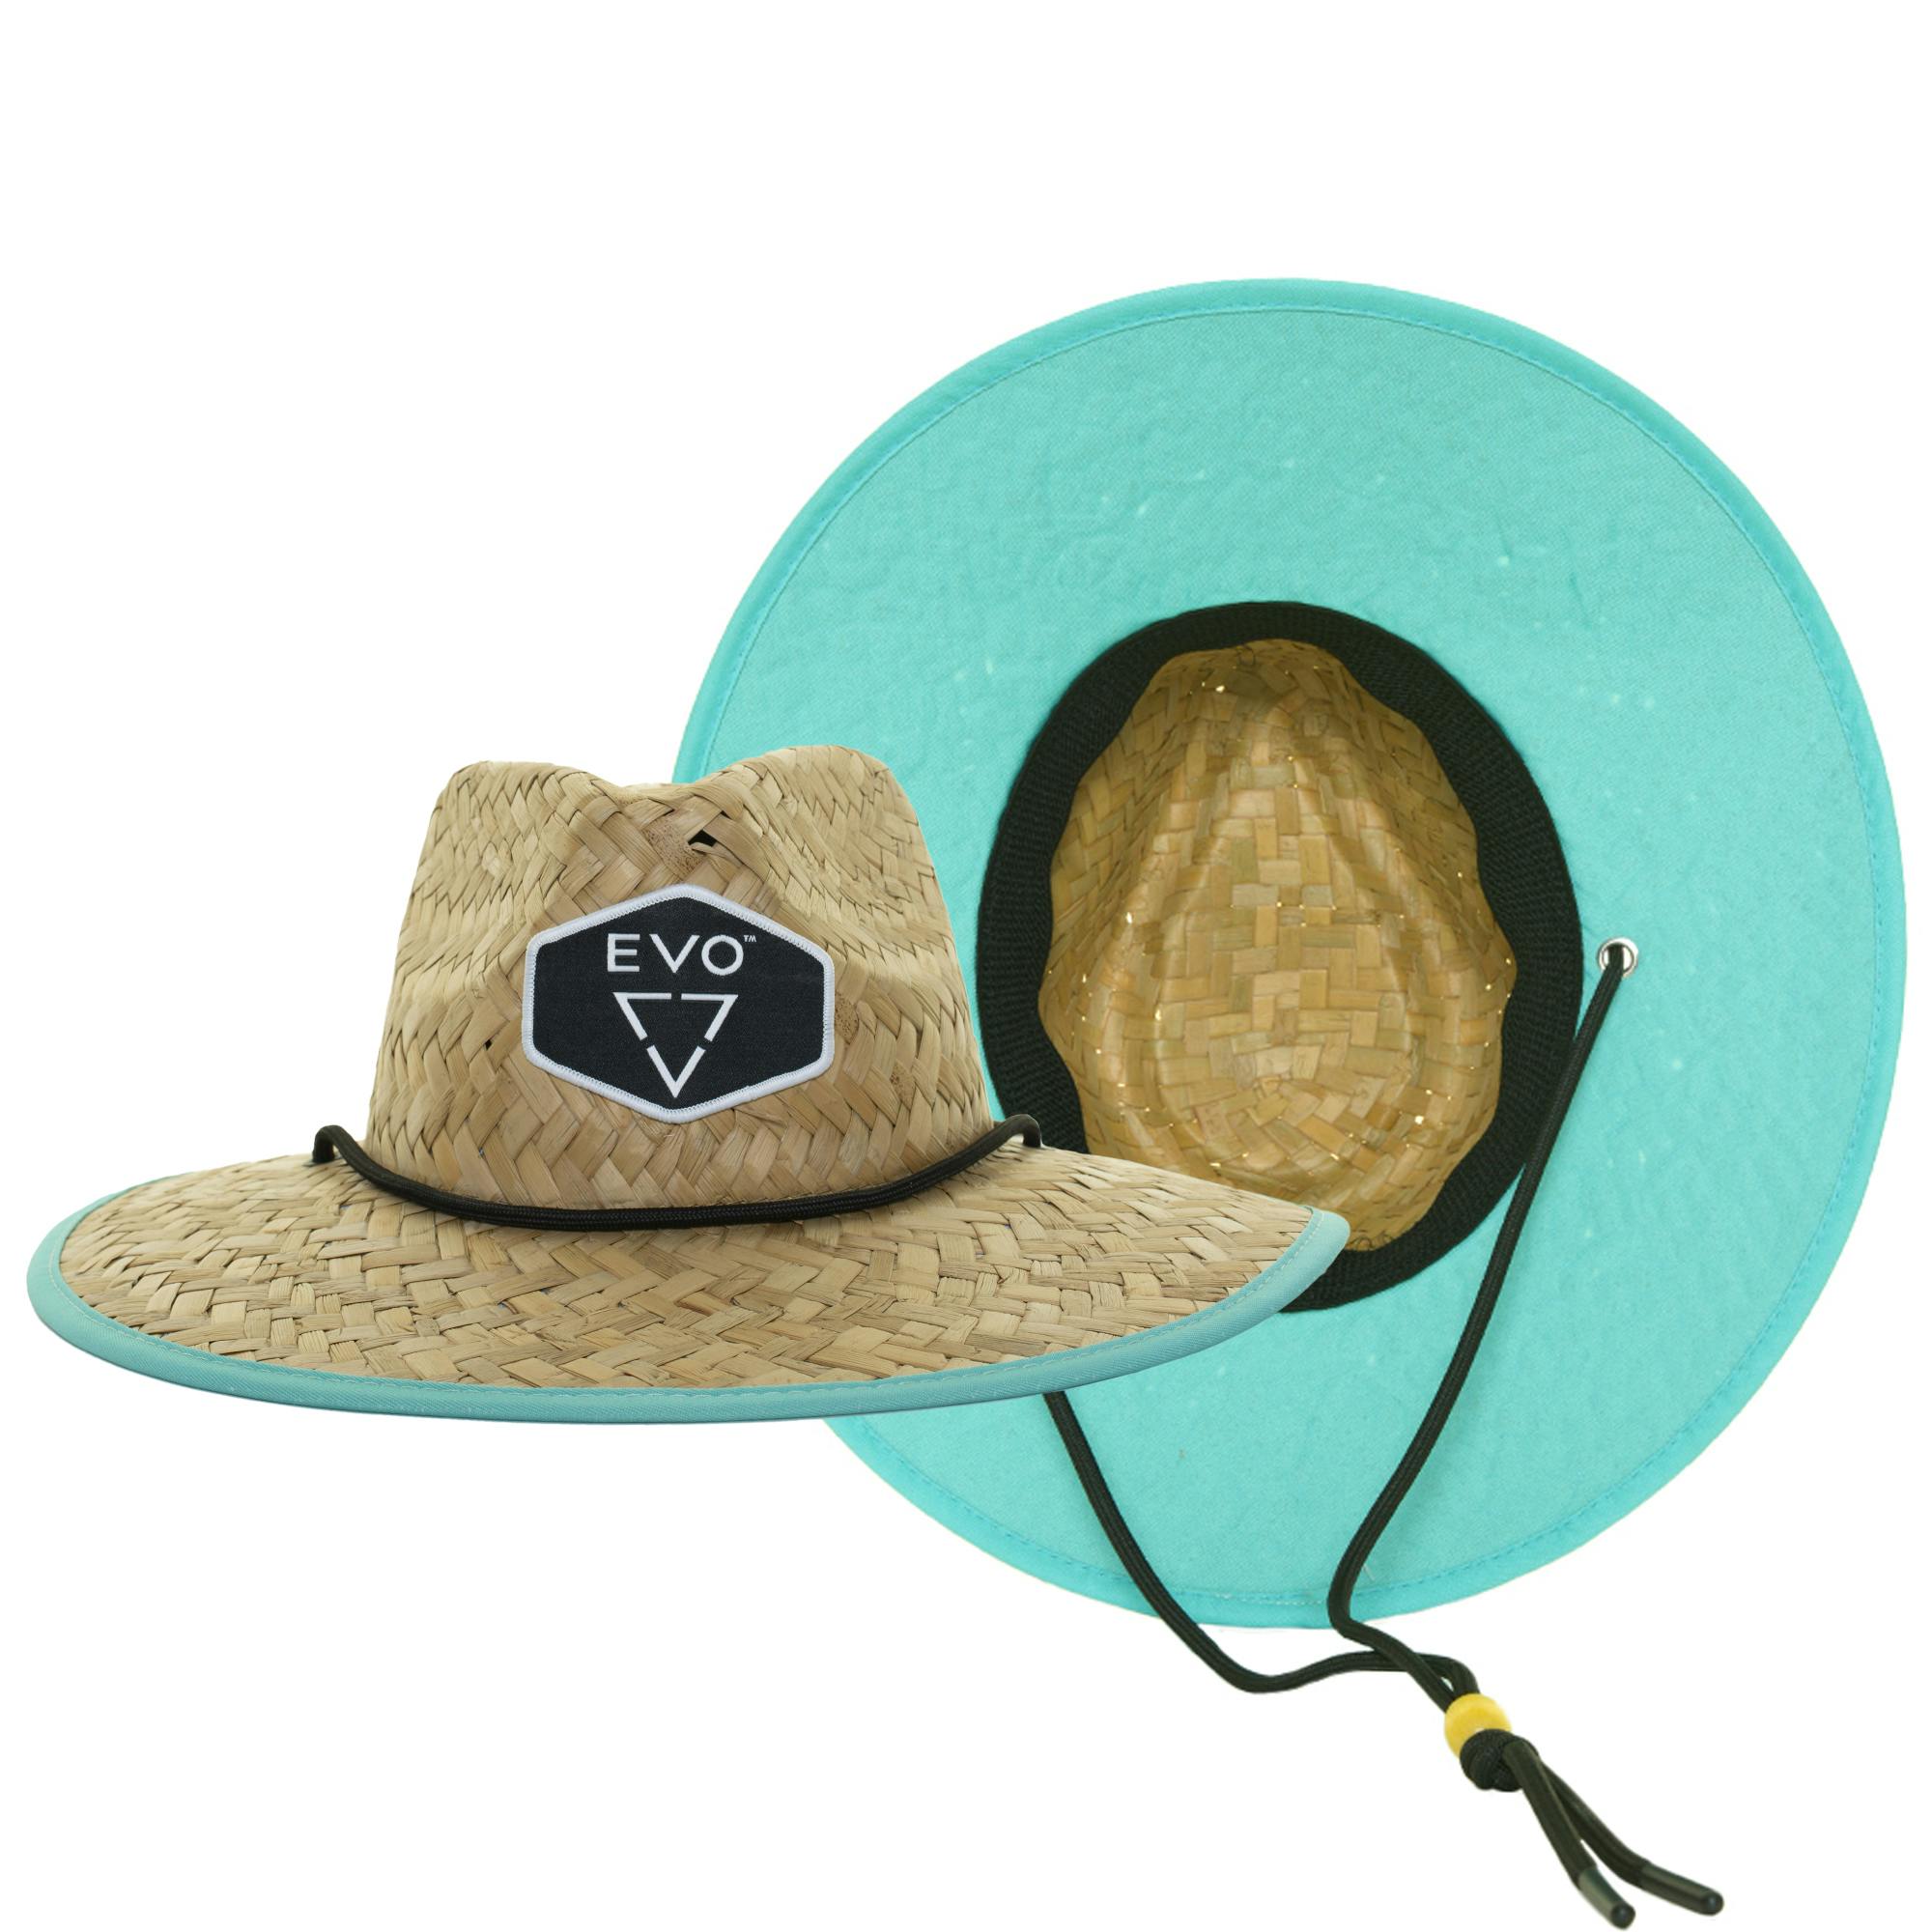 EVO Straw Lifeguard Hat - Jetty Mint (Women's) Front and Bottom View